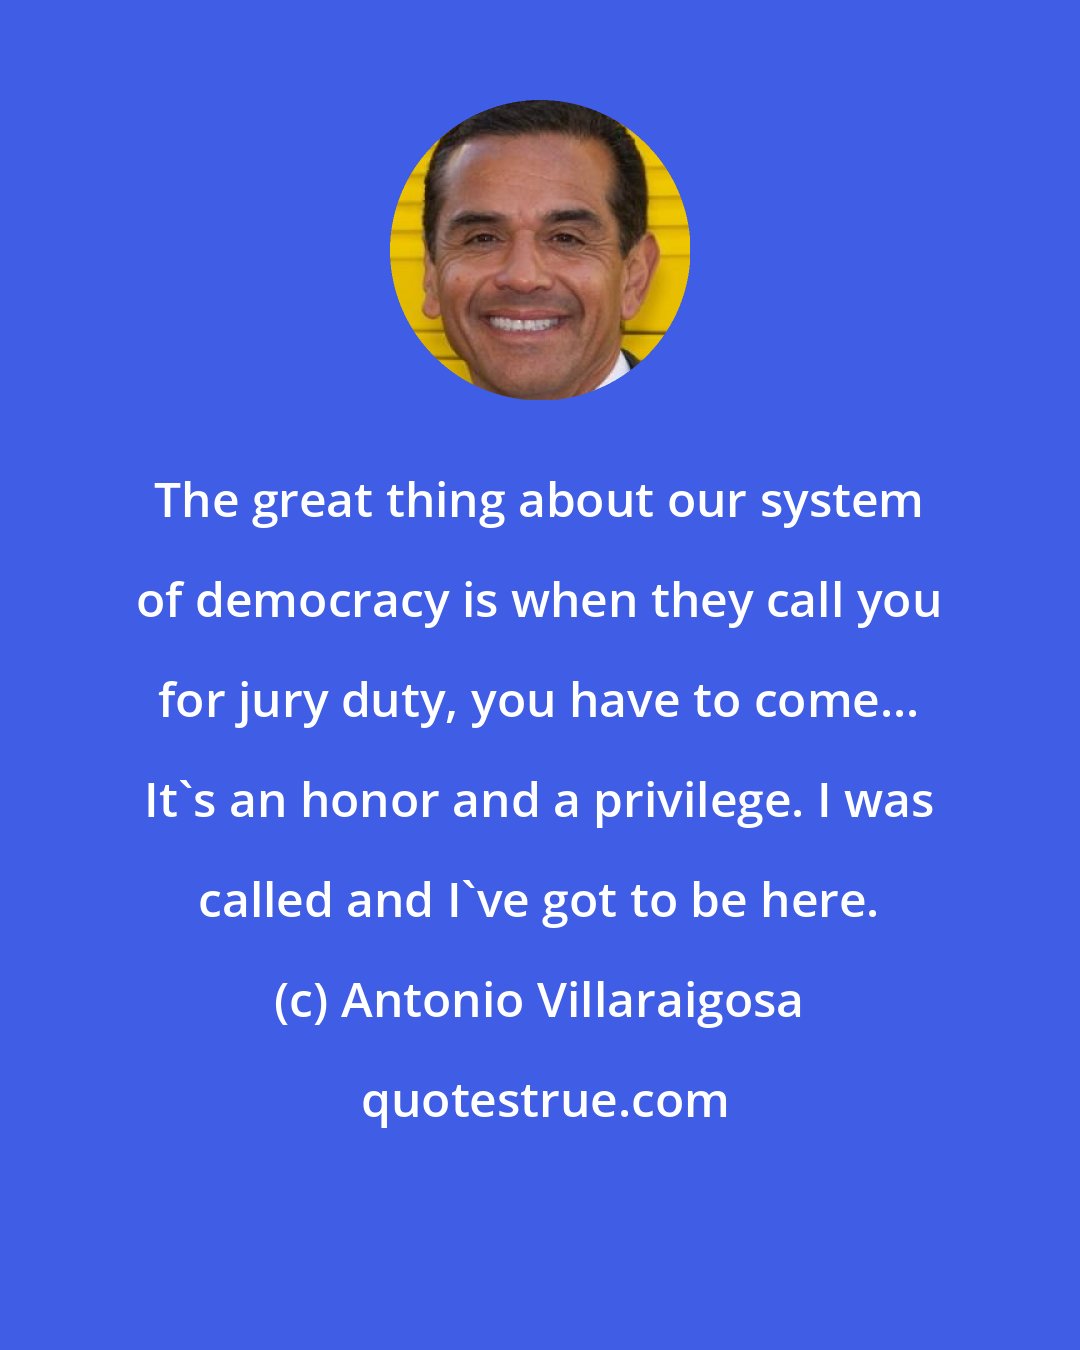 Antonio Villaraigosa: The great thing about our system of democracy is when they call you for jury duty, you have to come... It's an honor and a privilege. I was called and I've got to be here.